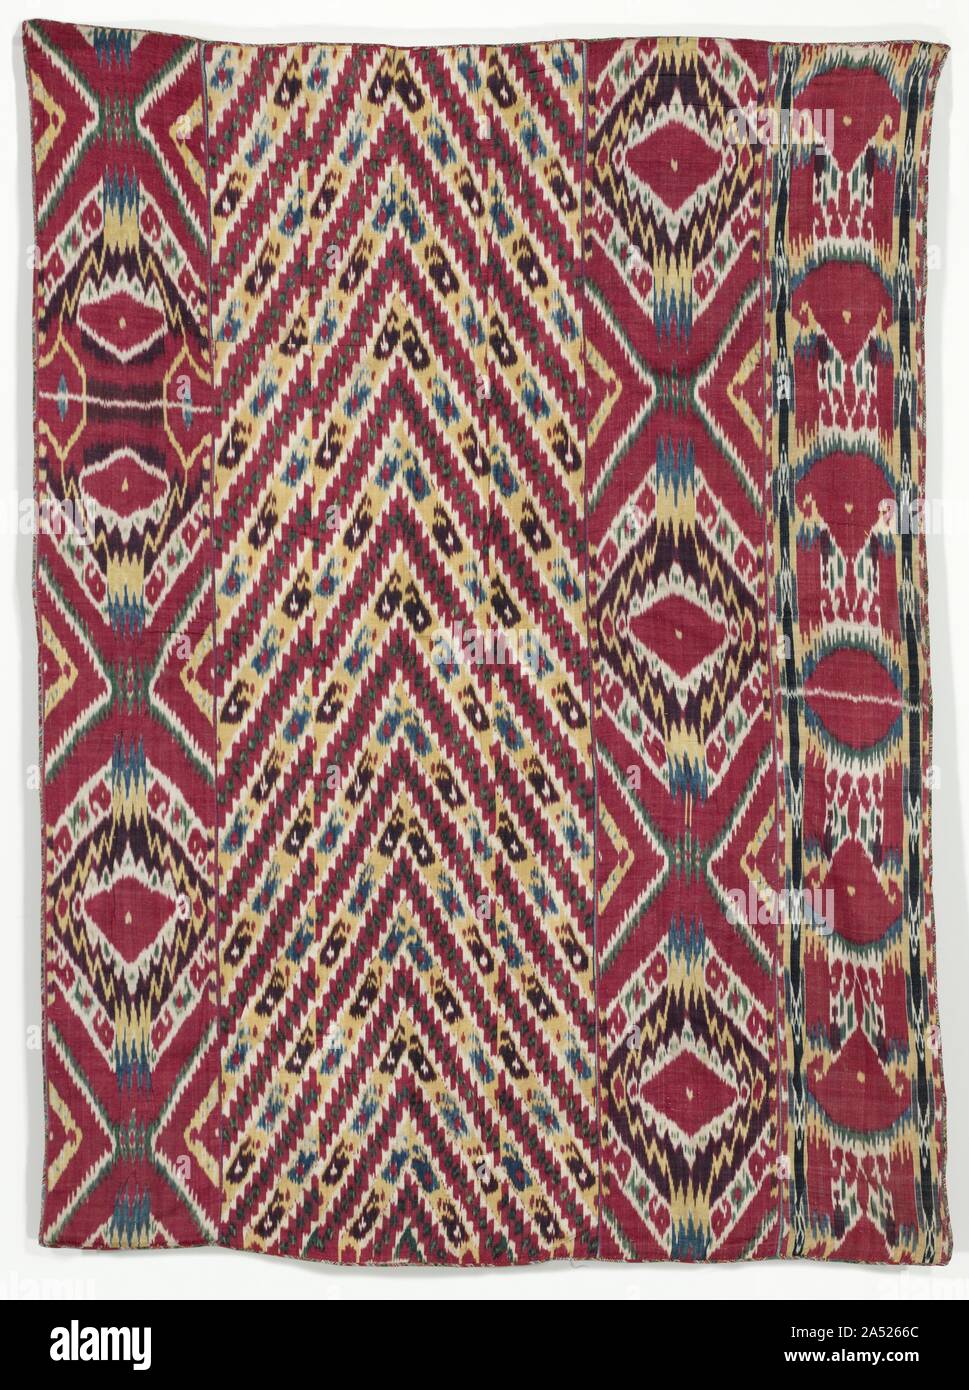 Silk Ikat Wall Hanging (#333), third quarter of the 1800s. Eye-dazzling patterns with saturated colours demonstrating the ikat technique provided vibrant wall hangings for the reception rooms of the urban elite in Central Asia. In this splendid example comprising five loom widths, three lengths display popular amulet designs while the two inner lengths are precursors to the bold chevron designs of the late 19th century. The irregular contours&#x2014;tell-tale indicators of ikat&#x2014;are masterfully controlled with five rich colours. In the ikat technique, designs are dyed on the warp (vertic Stock Photo